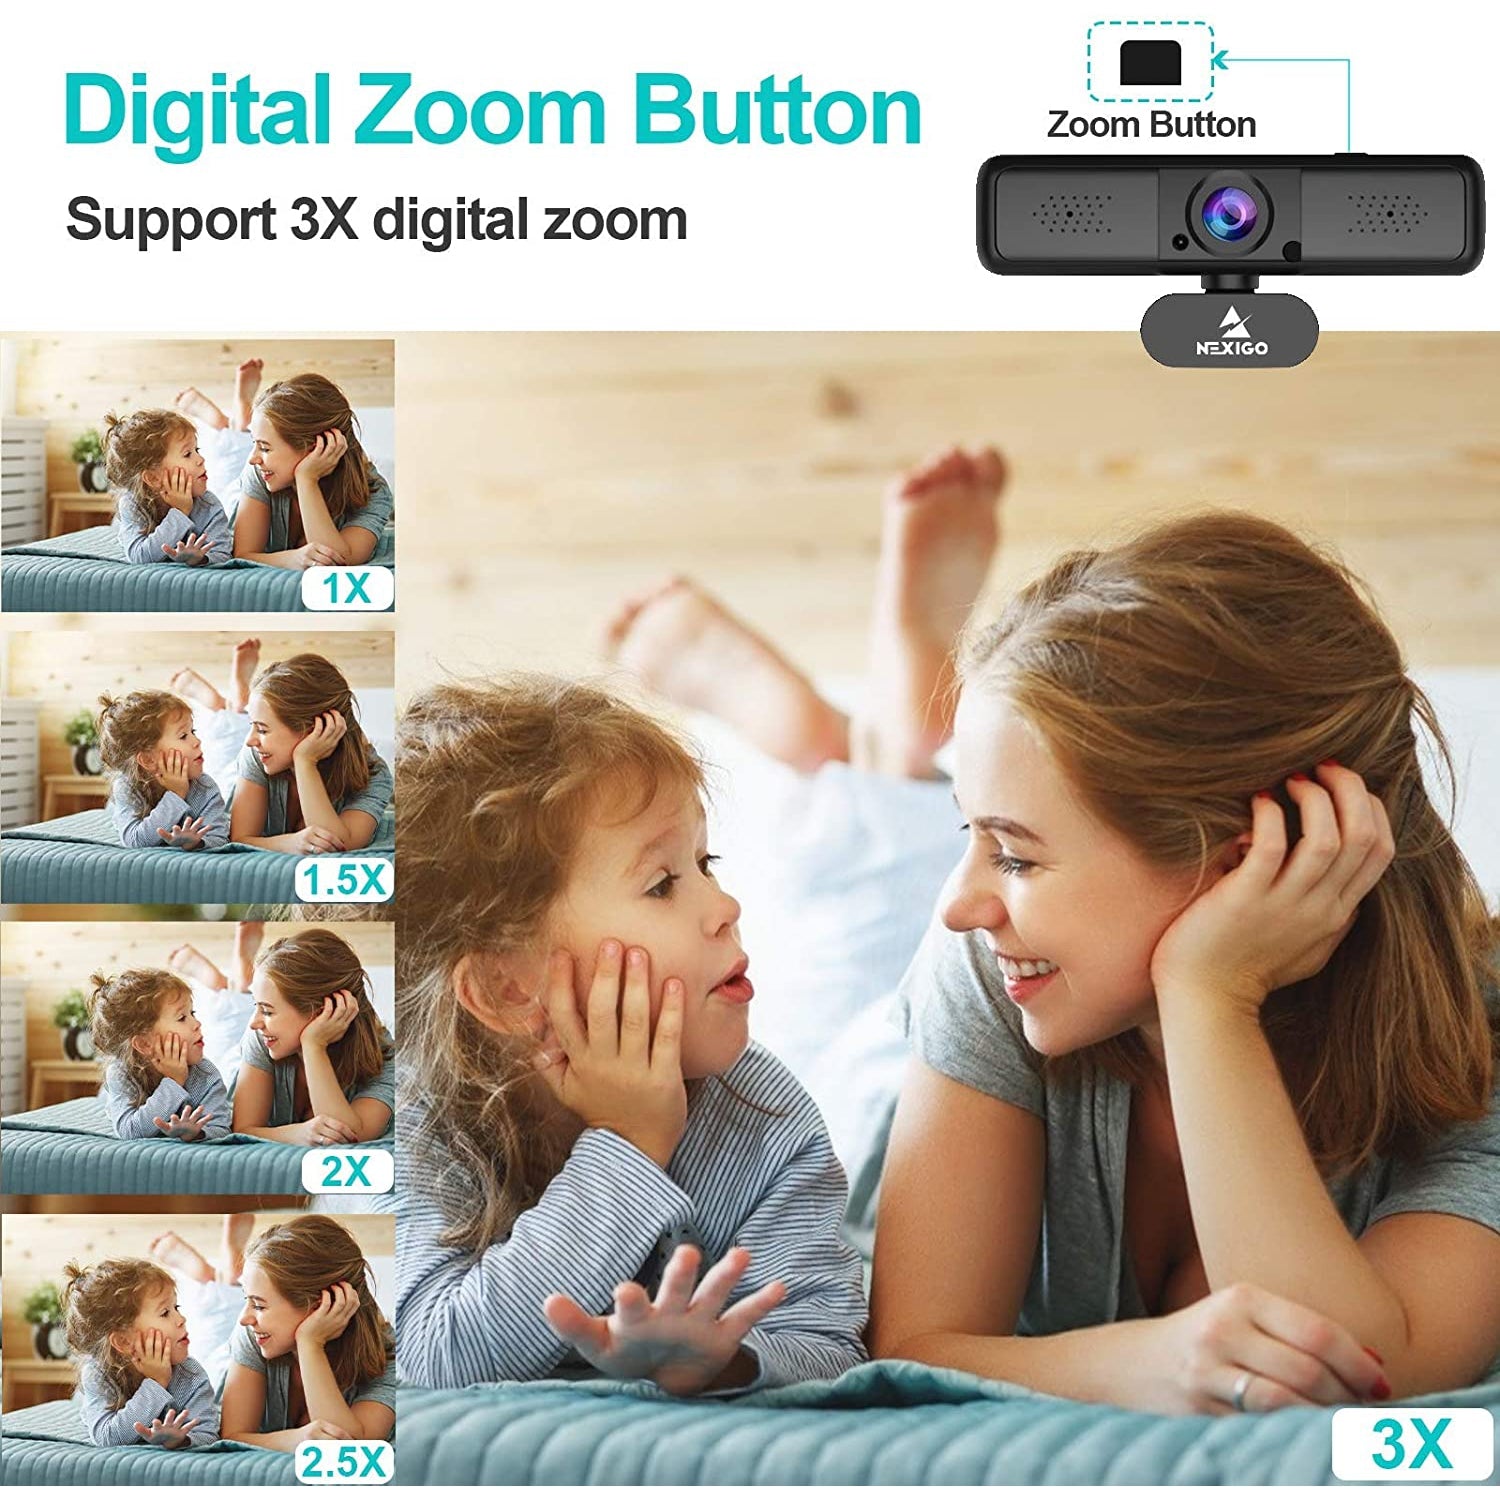 The webcam has a zoom button on the top, supporting up to 3x magnification.